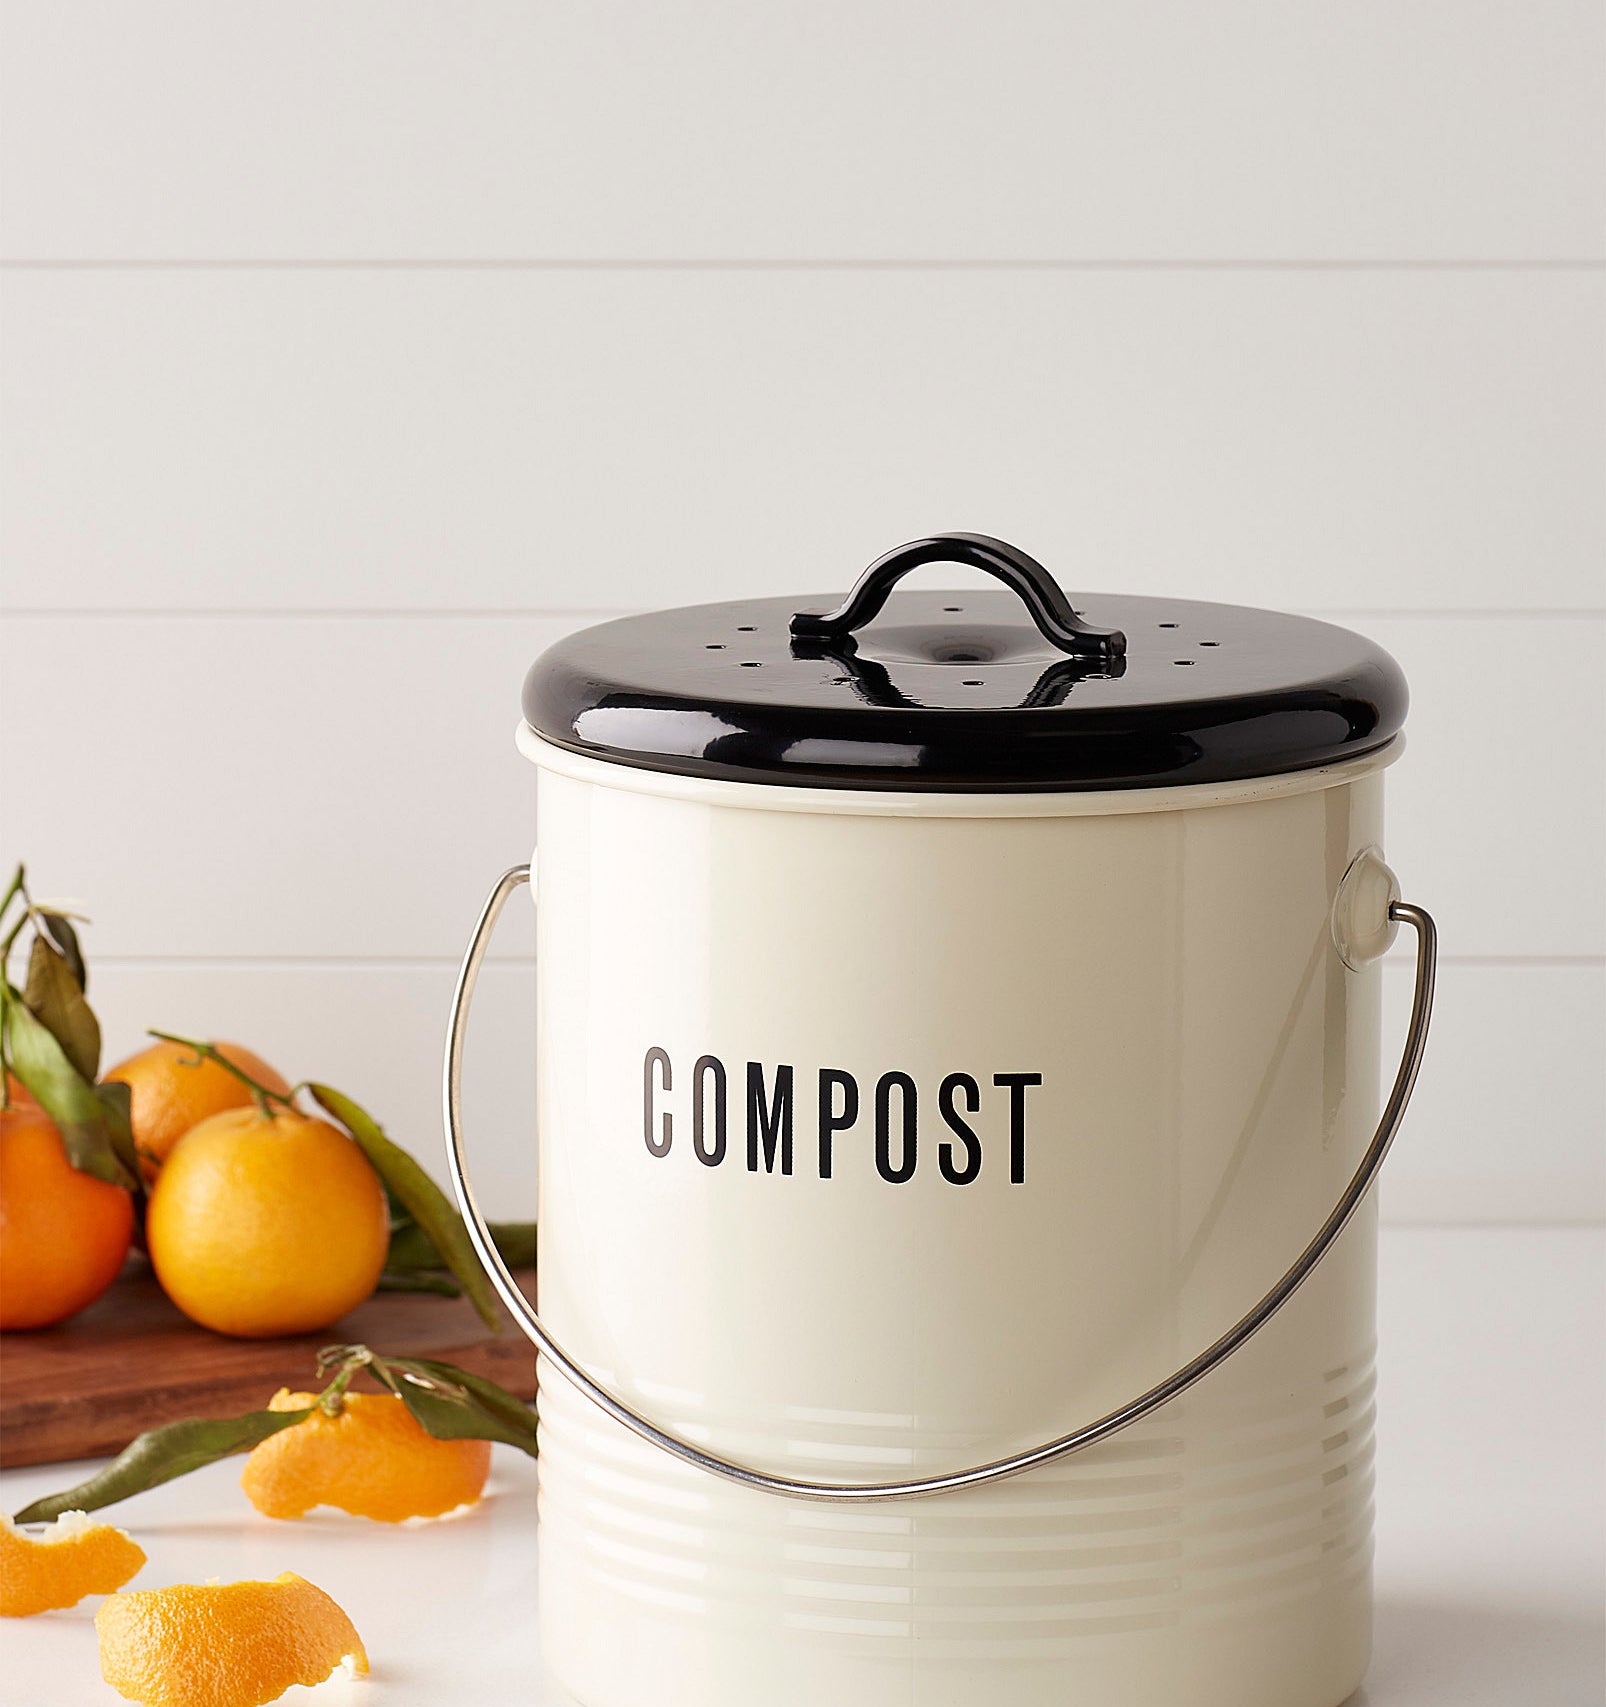 A cute compost bin that says &quot;compost&quot; on it